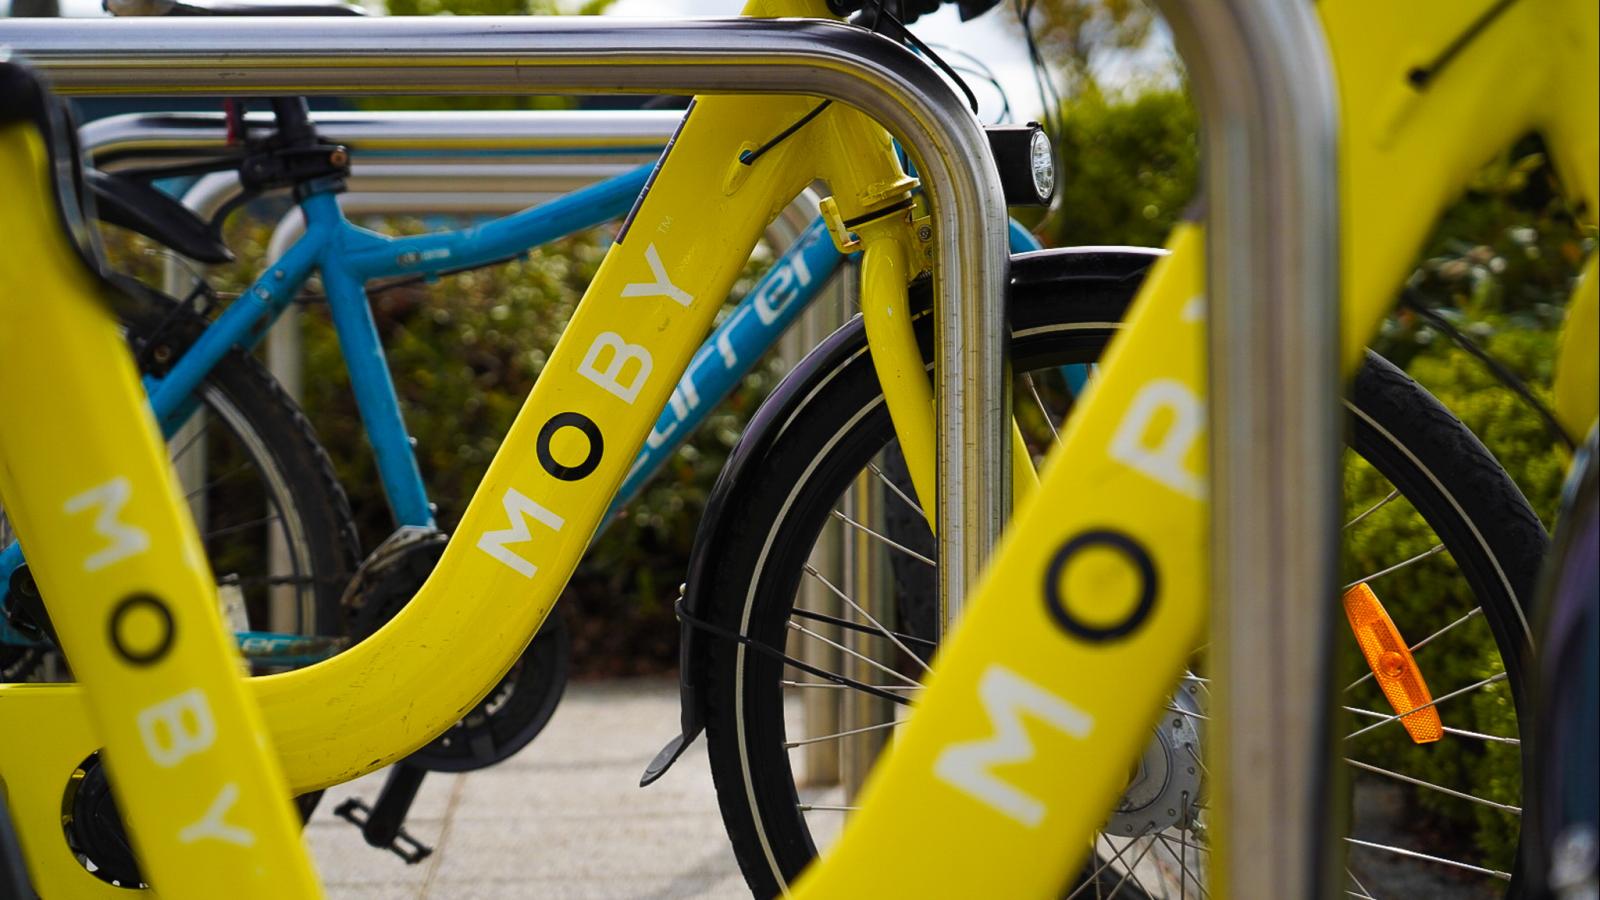 Moby Bikes Dublin at Sport Ireland Campus